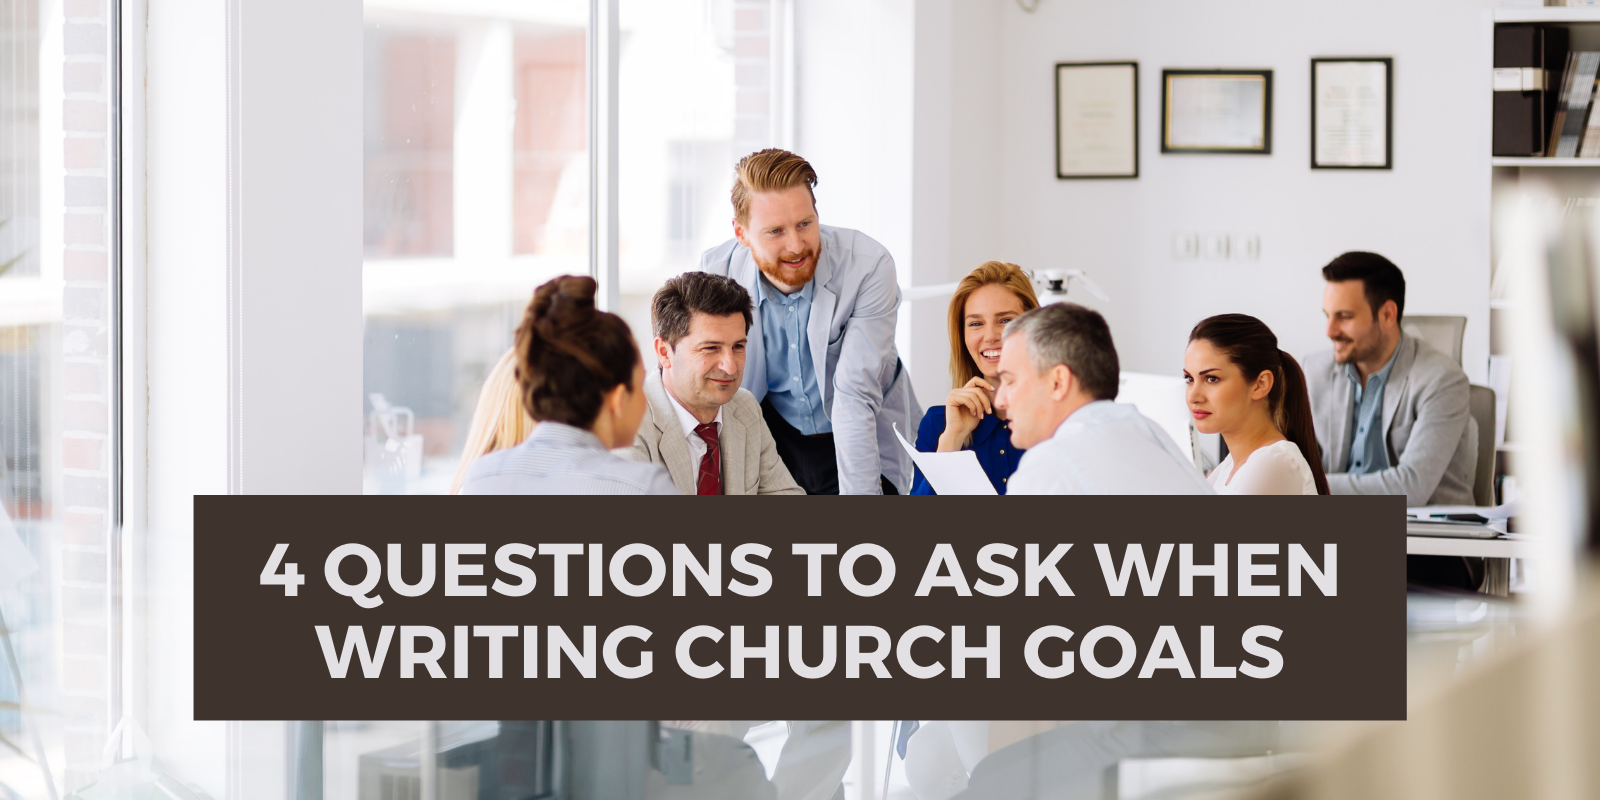 4 Questions to Ask When Writing Church Goals Smart Church Management